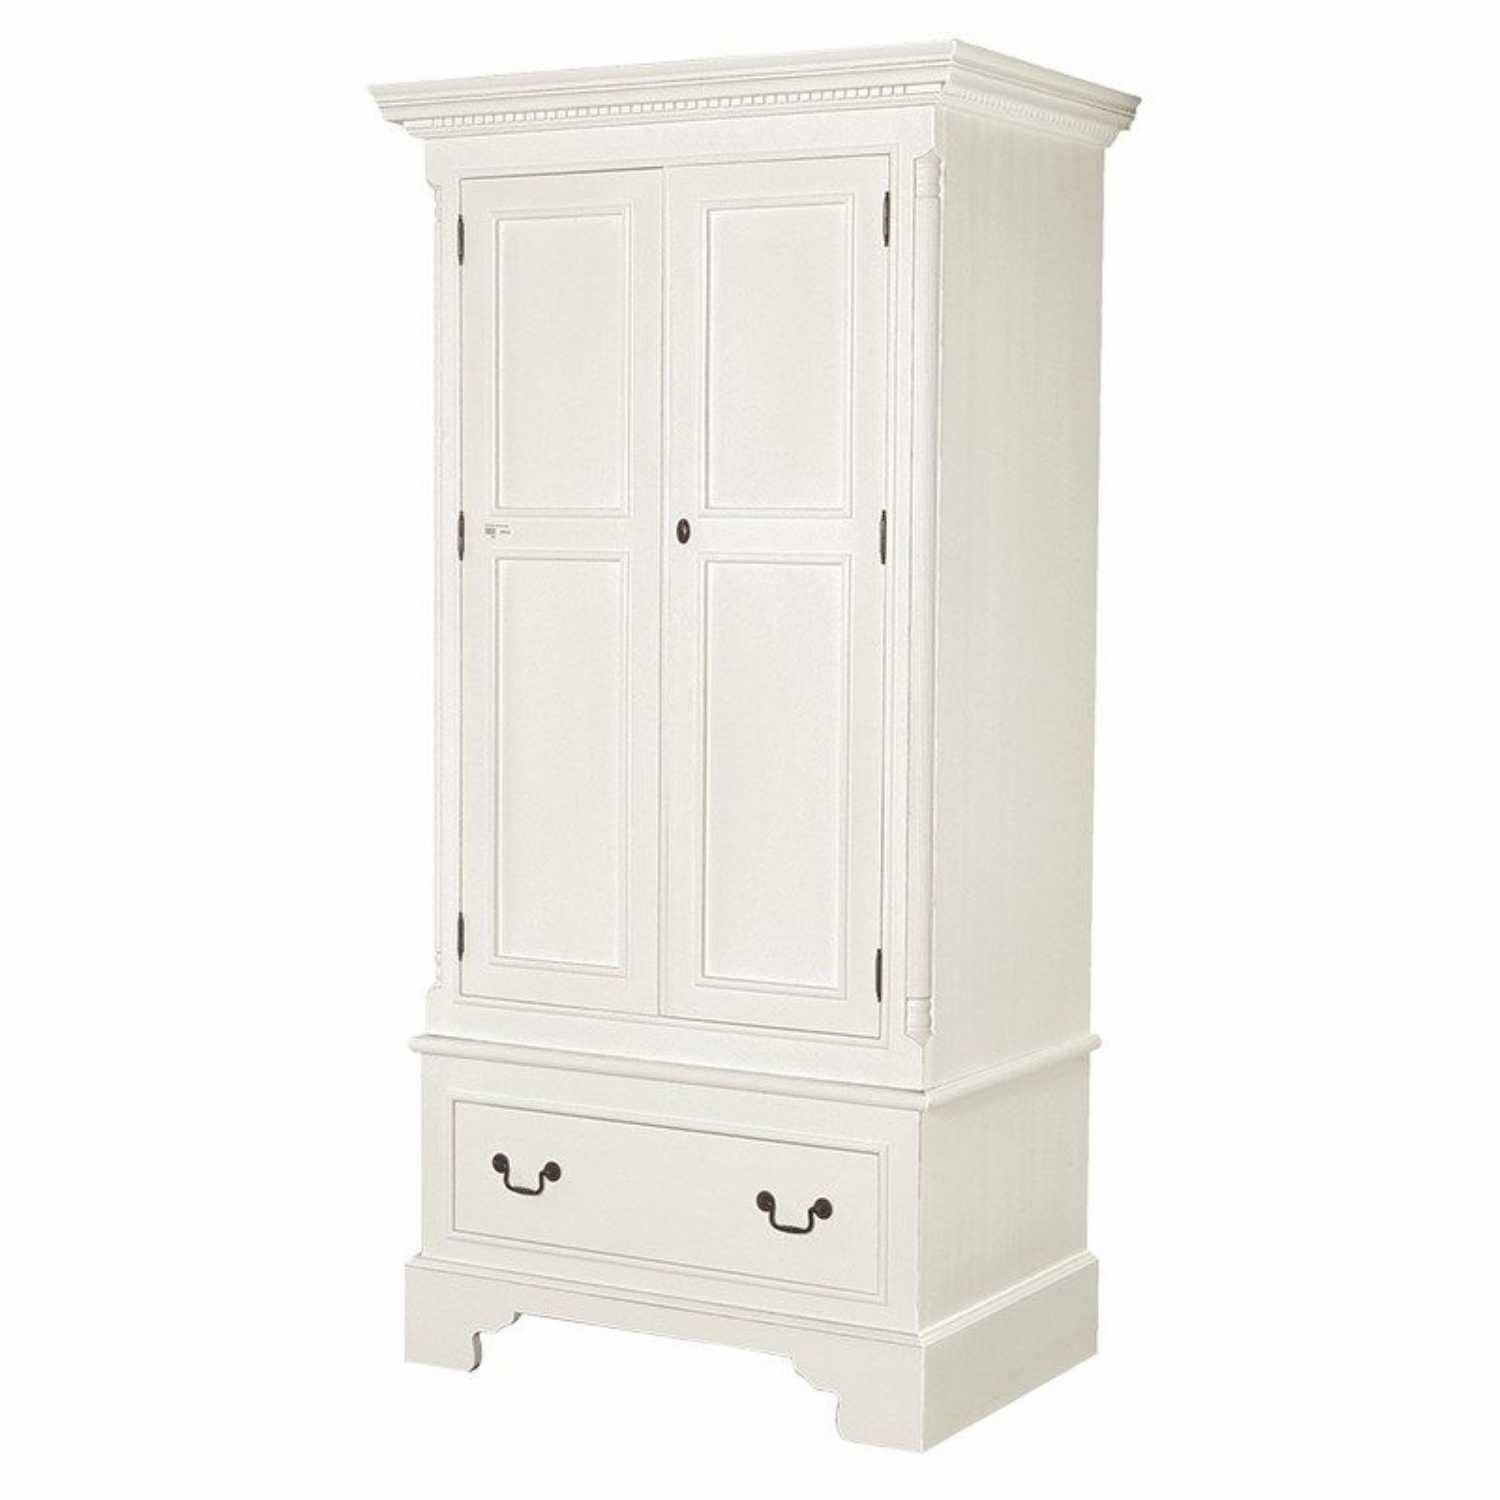 Georgian Shabby Chic White Painted Small Double Wardrobe With Drawer Throughout Shabby Chic White Wardrobes (Photo 9 of 15)